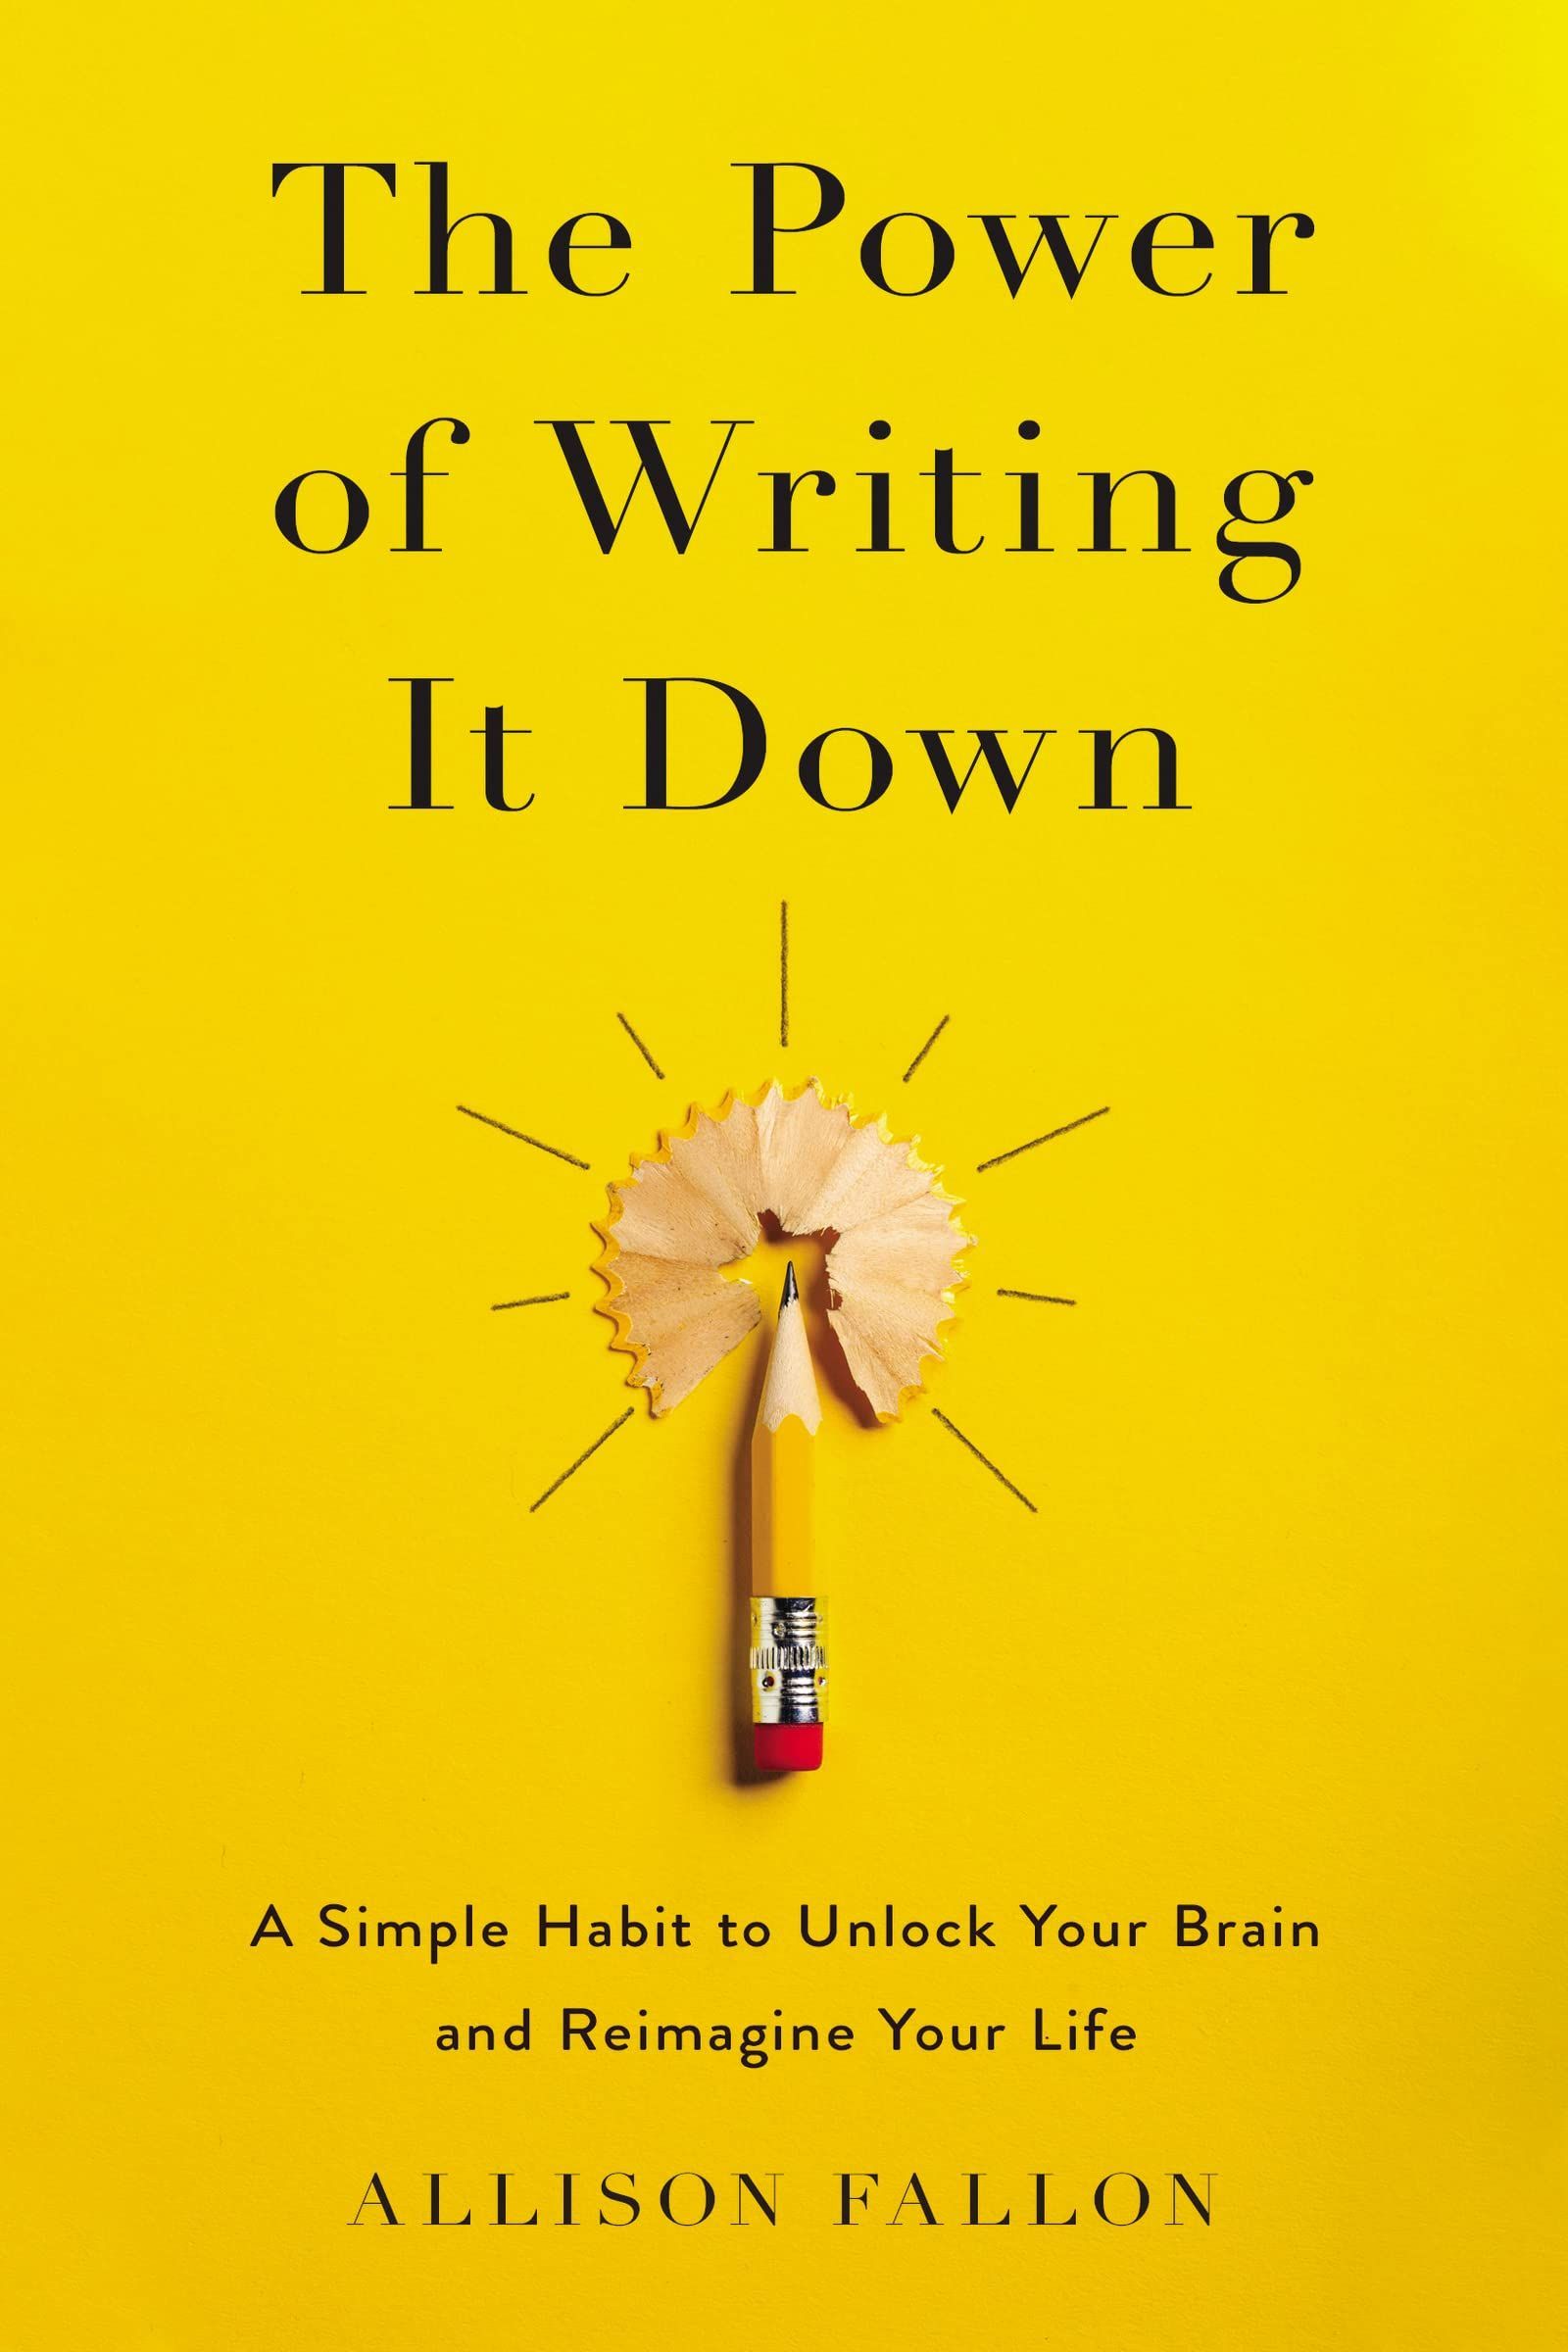 'The Power of Writing It Down' by Allison Fallob